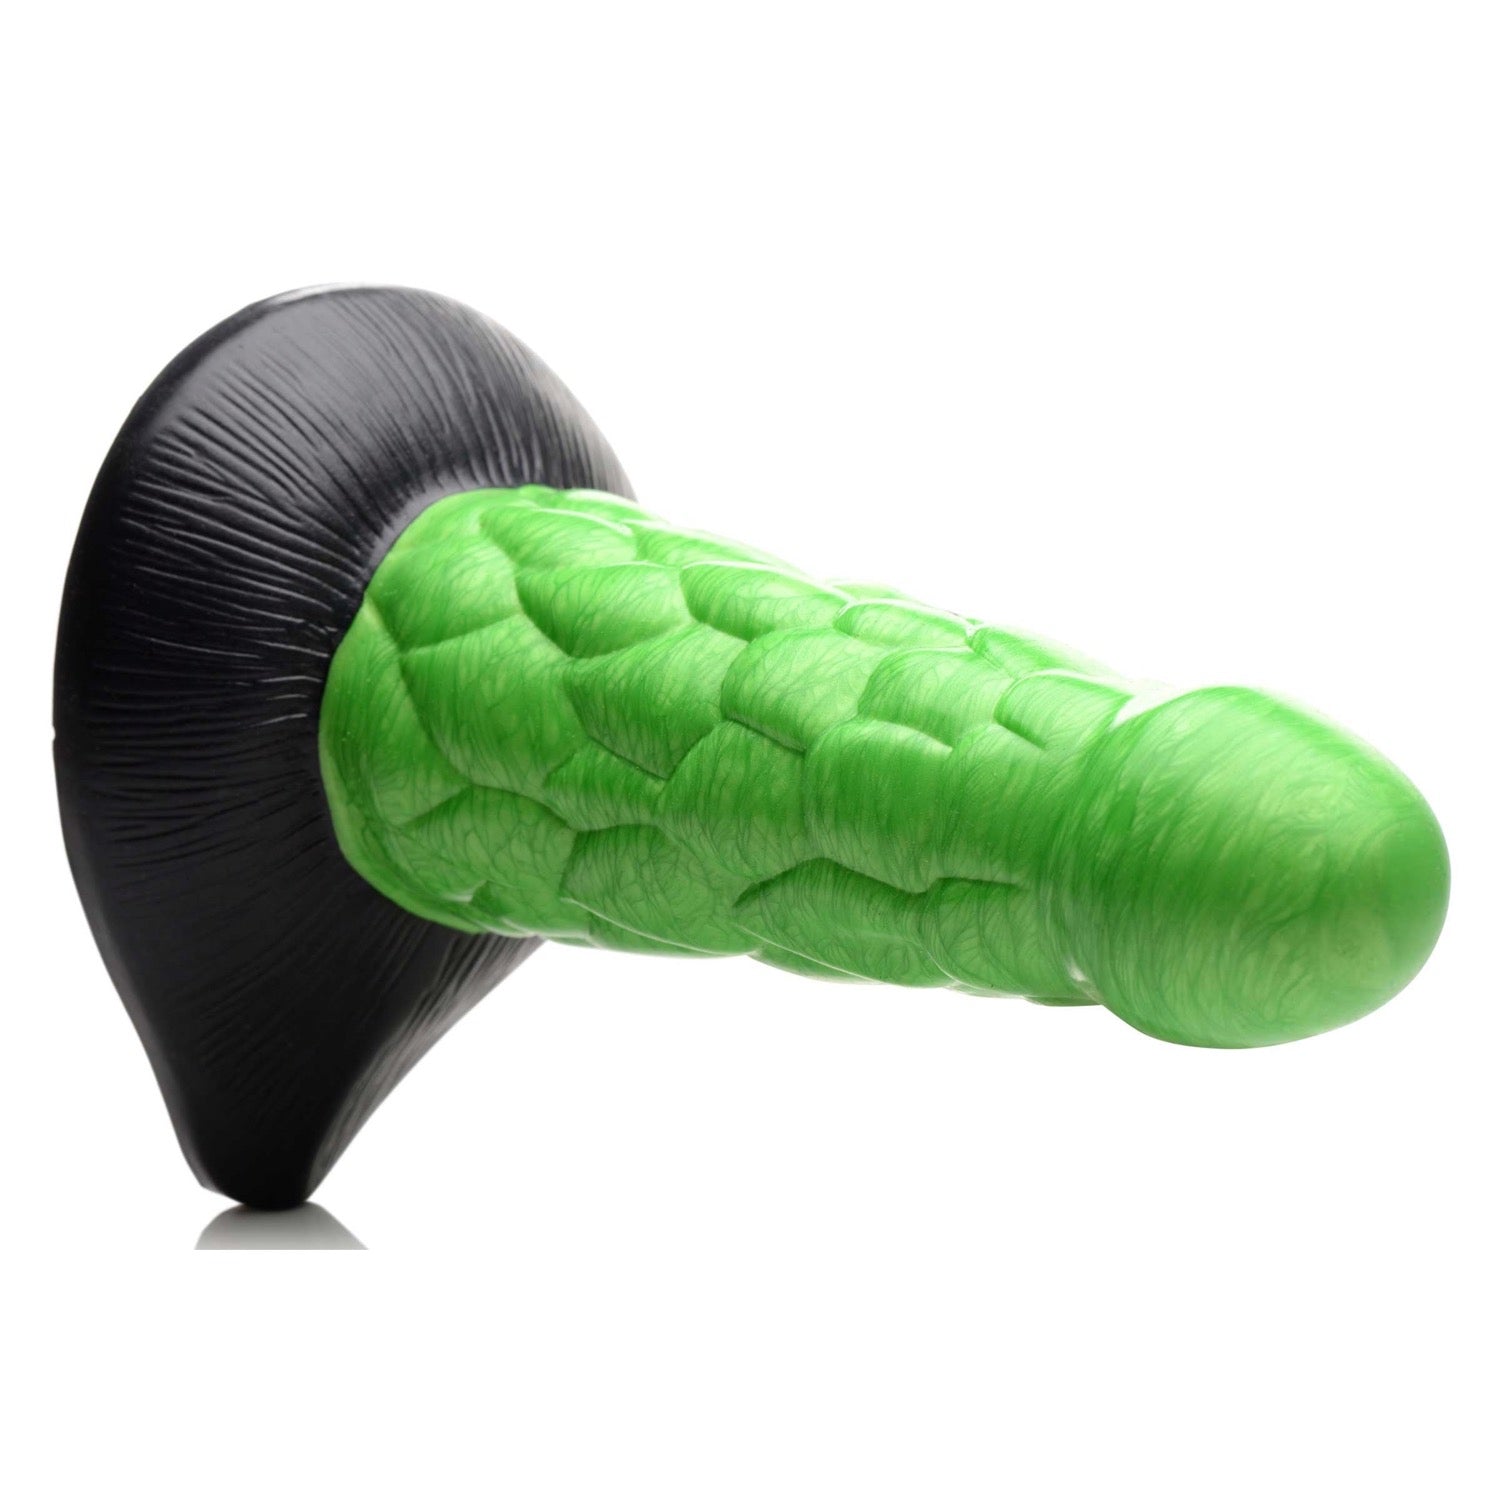 Creature Cocks Radioactive Reptile Thick Scaly Silicone 7.5&quot; Dildo by XR Brands